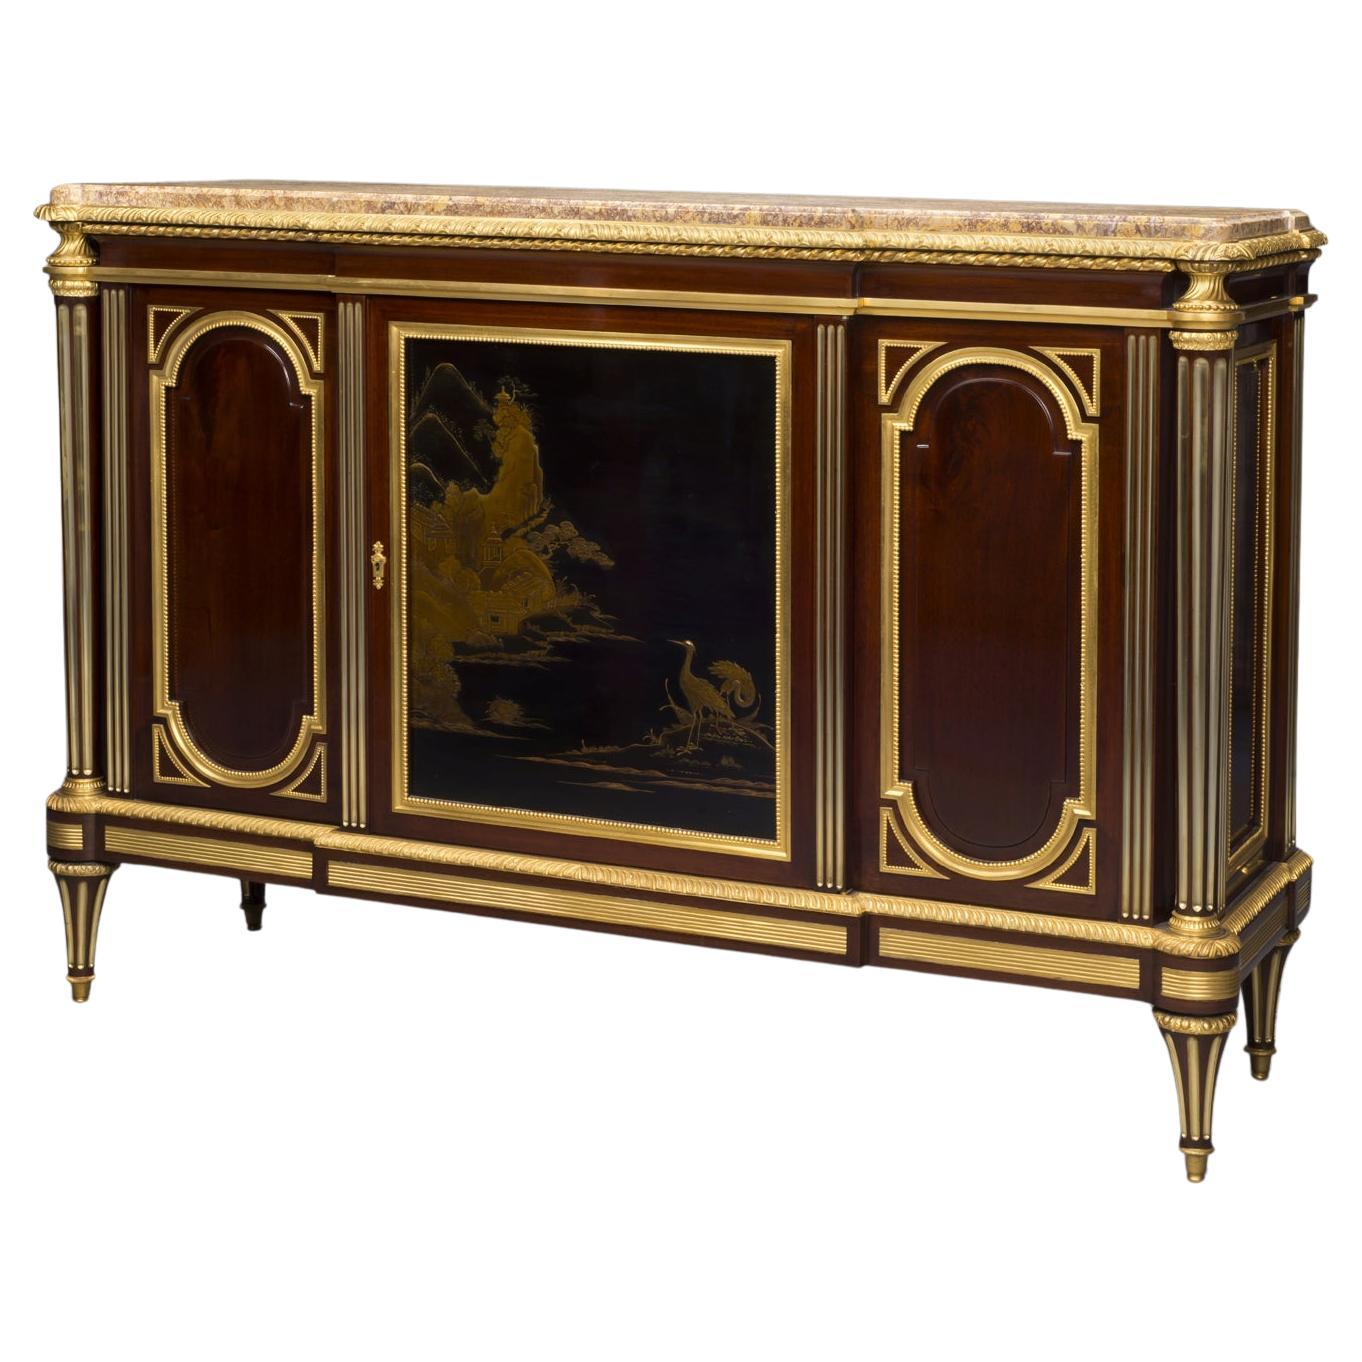  Louis XVI Style Gilt-Bronze Mounted Mahogany And Lacquer Commode à Vantaux For Sale